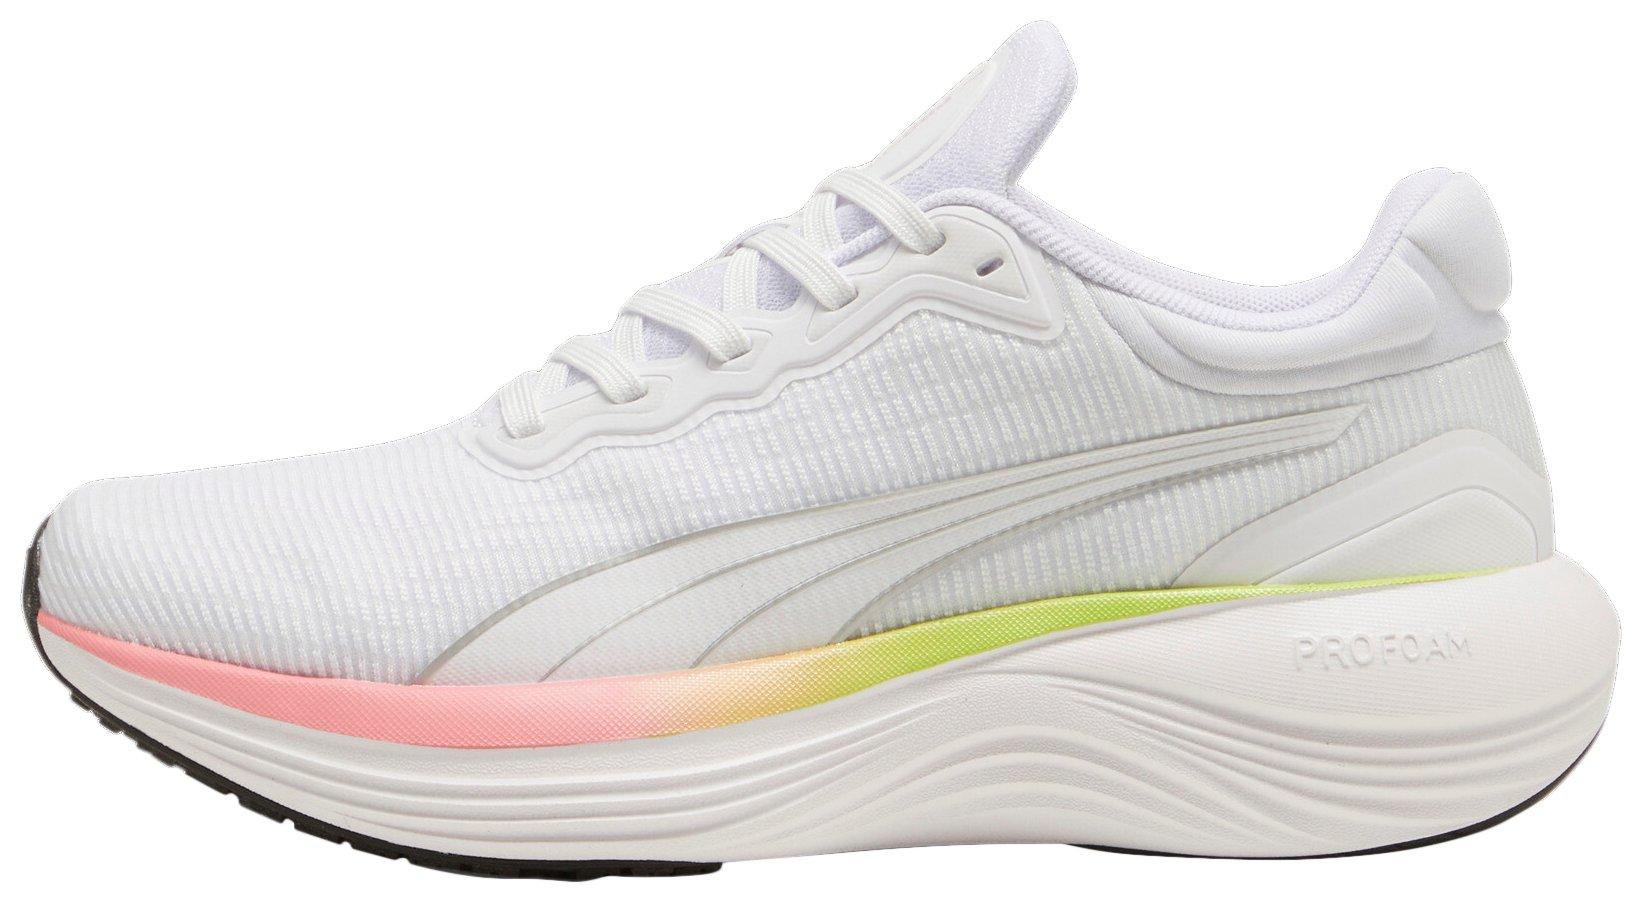 Puma Womens Scend Pro Ultra Running Shoes